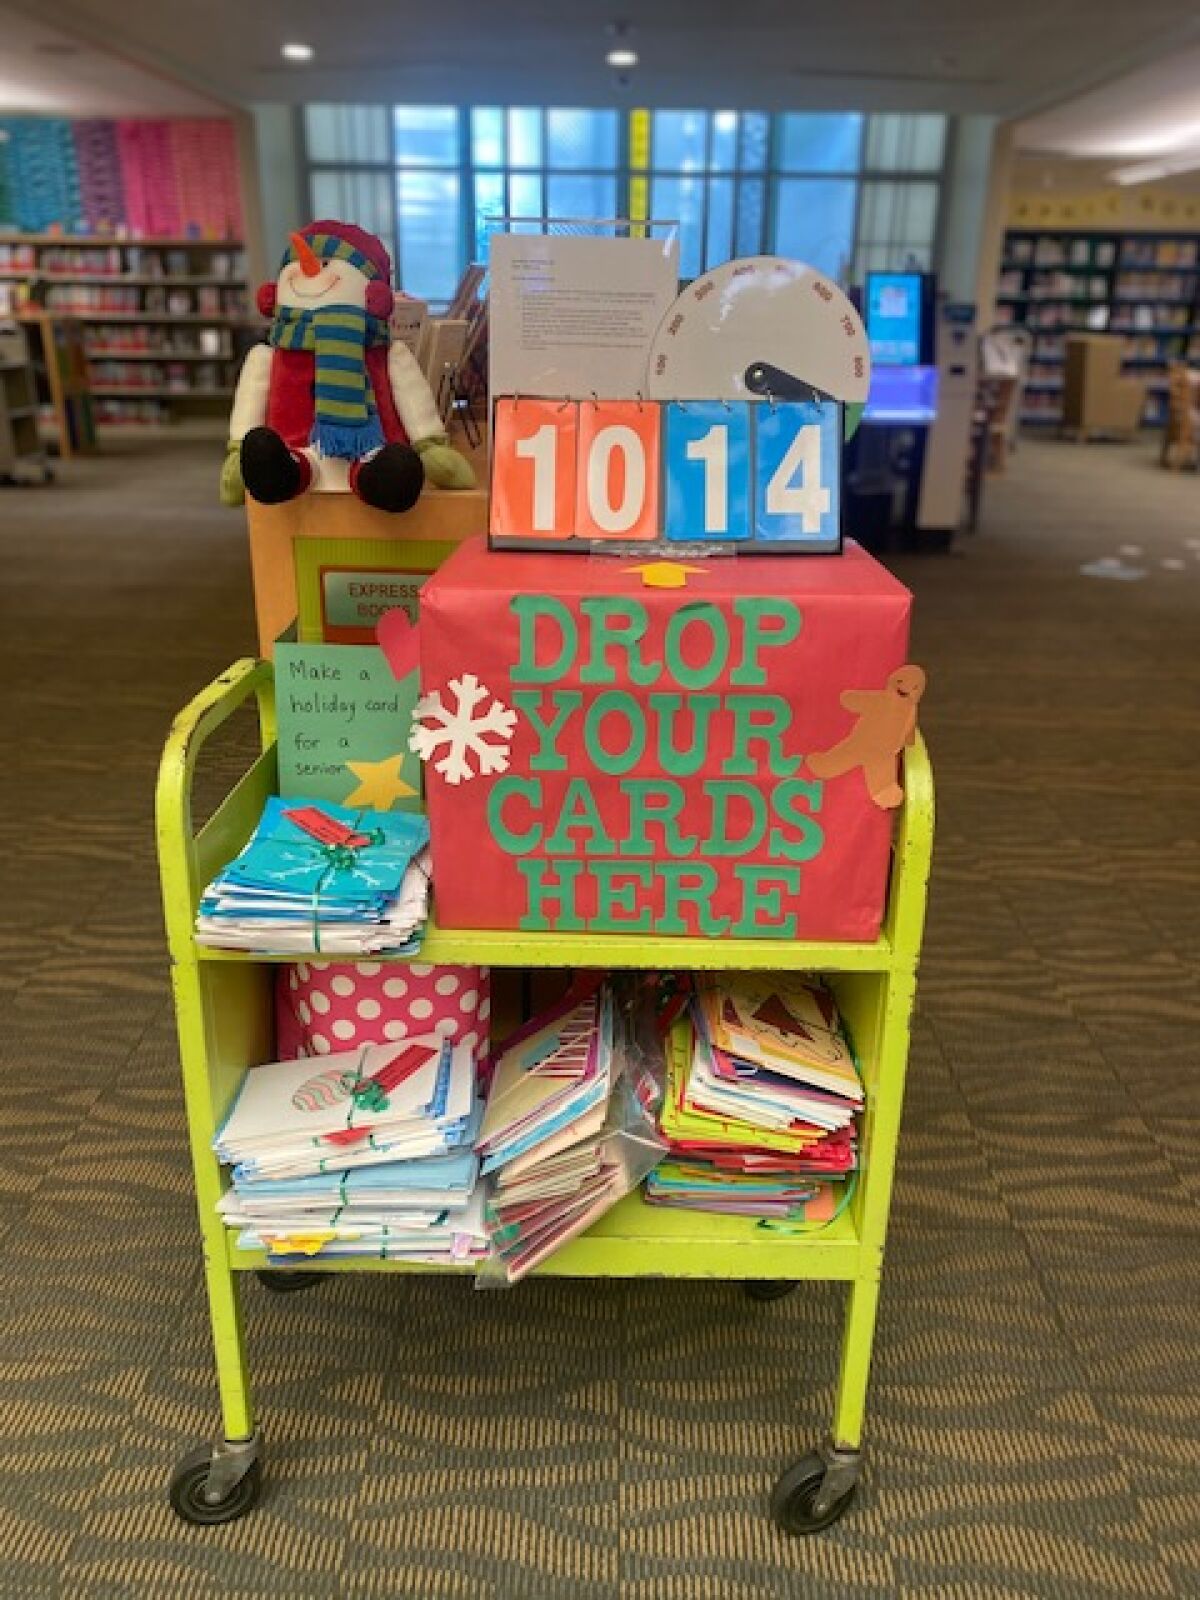 The La Jolla/Riford Library's holiday card drive for seniors collected 1,014 cards.